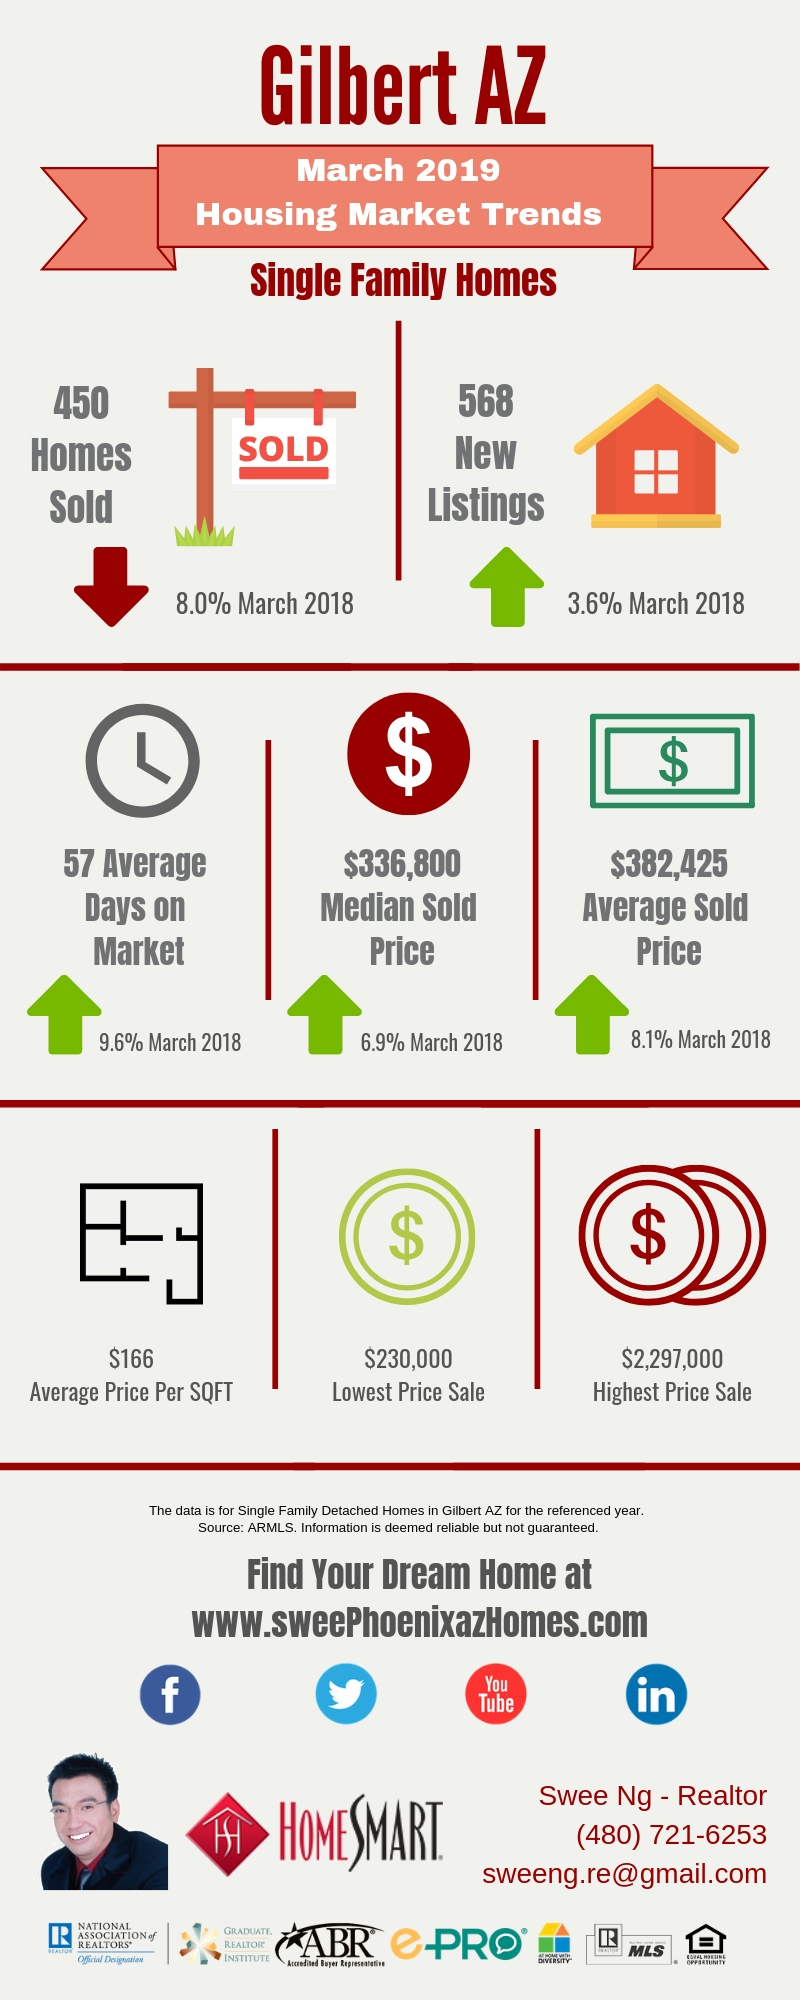 Gilbert AZ Housing Market Trends Report March 2019 by Swee Ng, Real Estate and House Value